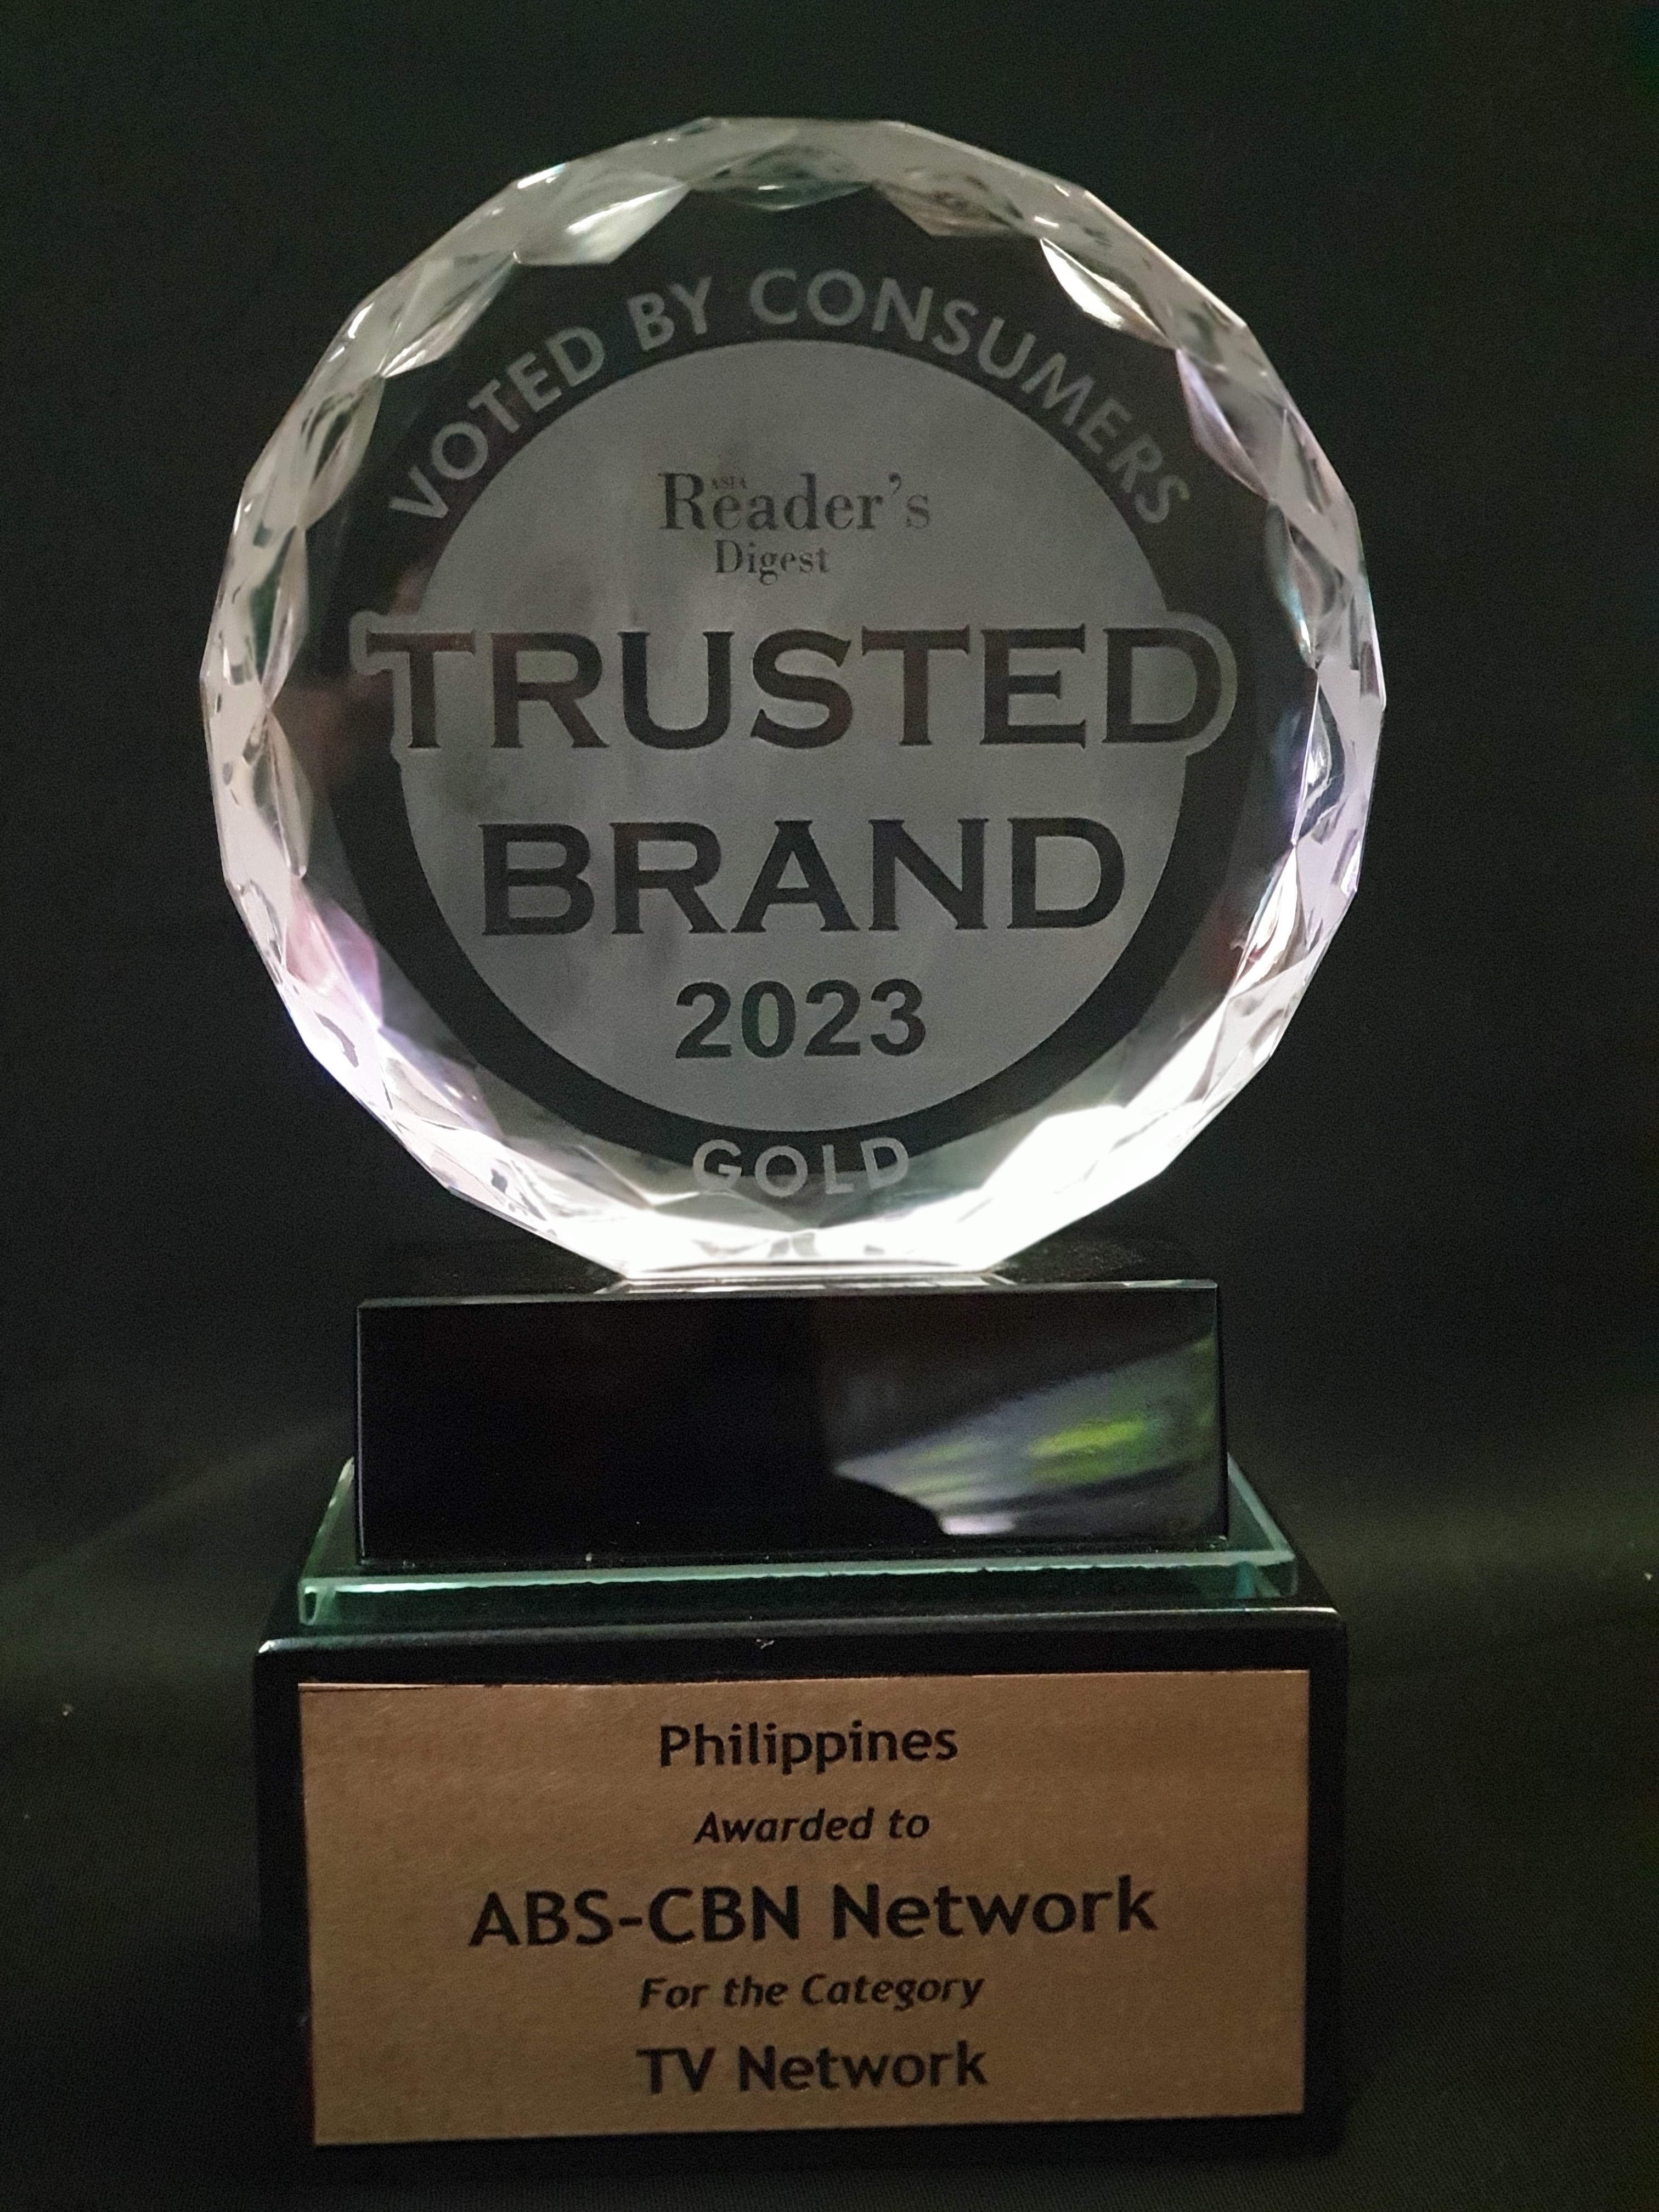 ABS CBN bags Gold award at Reader's Digest Trusted Brand 2023